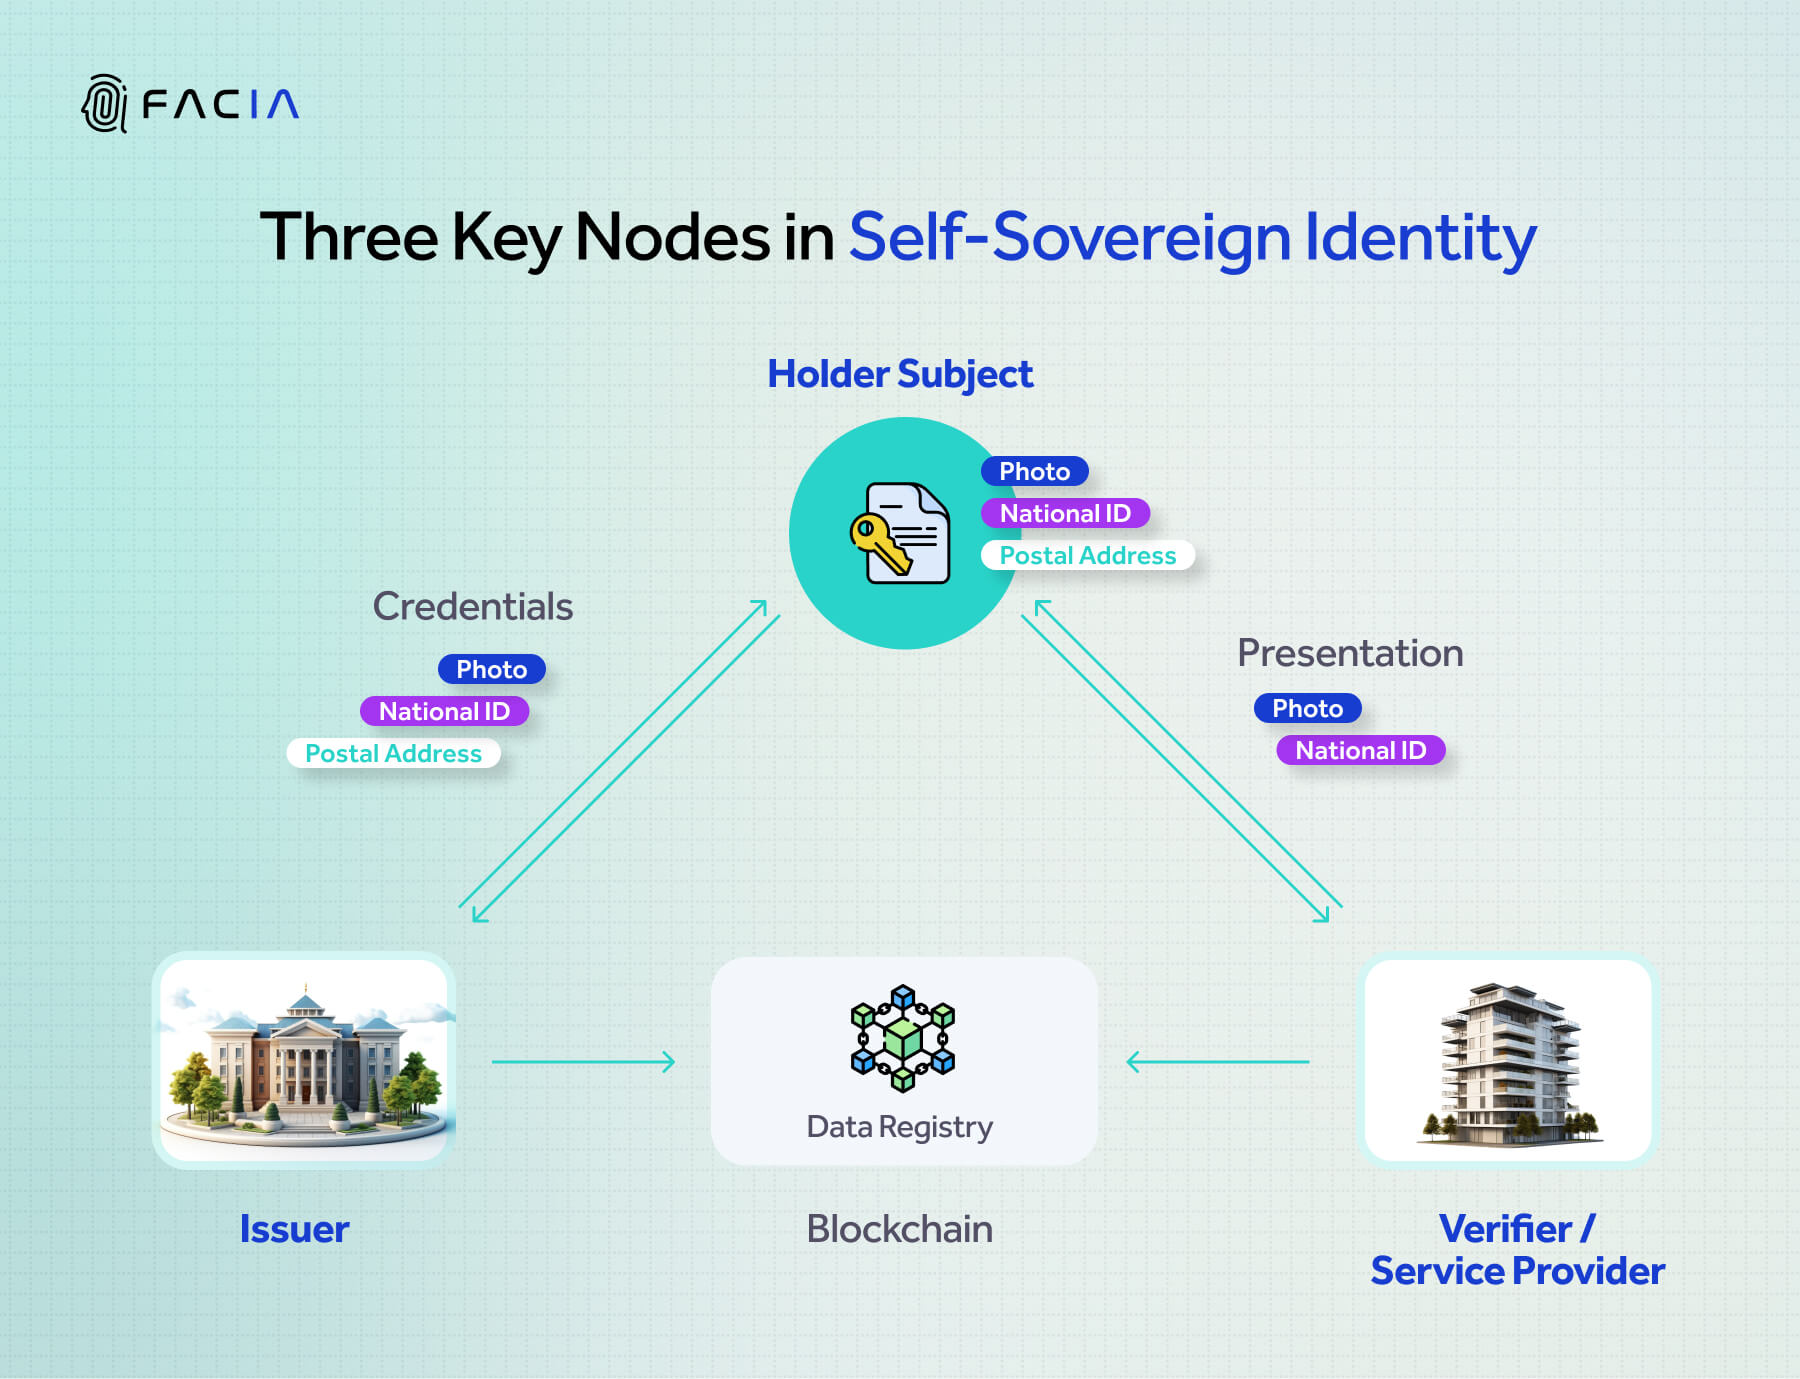 The image shows the flow diagram of how self-sovereign identity (SSI) is issued and controlled by a user involving the Issuer, Holder (User), and the Verifier.